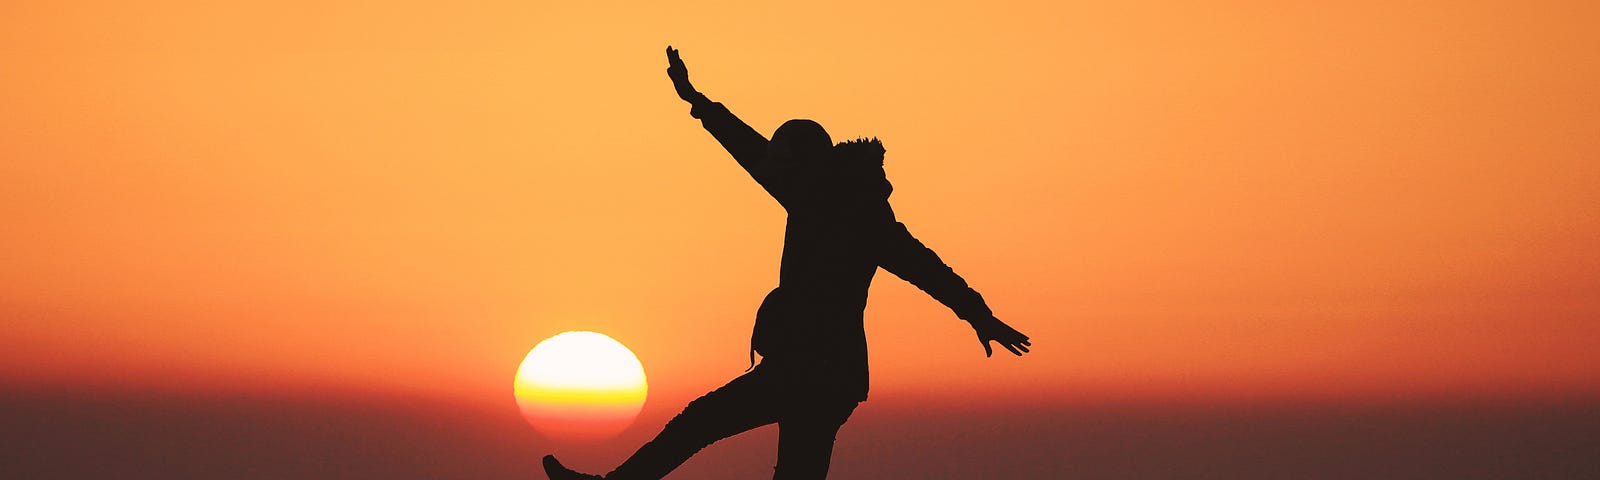 A person is seen silhouetted against a setting sun (with an orange sky). The individual is balanced (on a rock) on his/her left leg, right leg extended out. Arms are out laterally for balance.